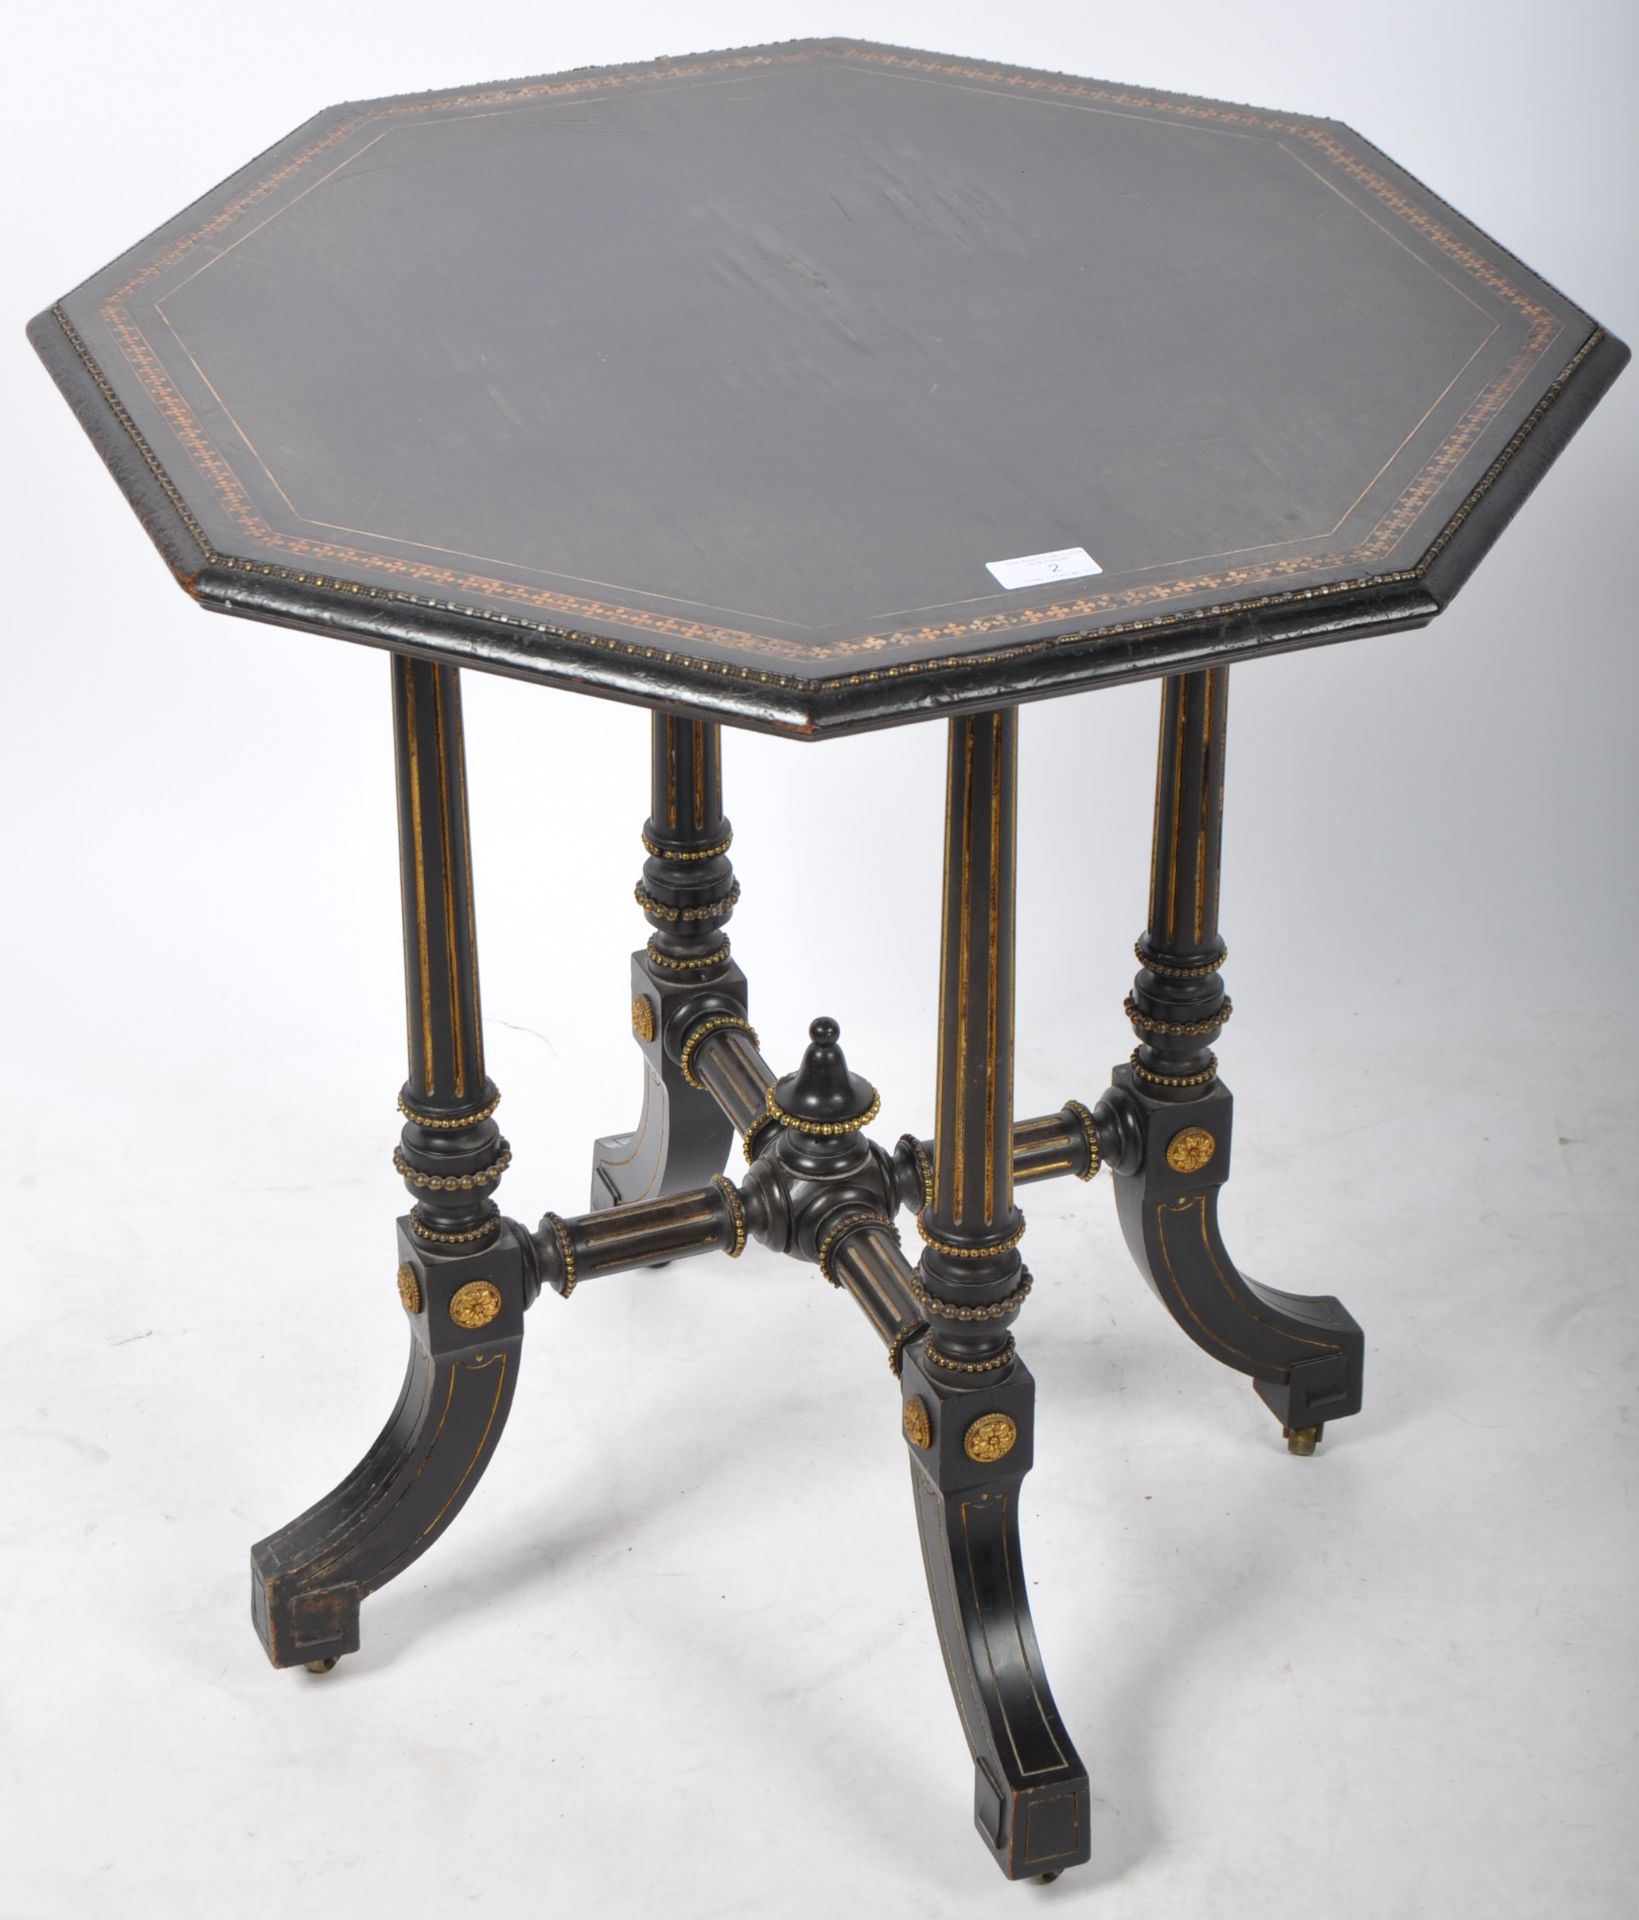 GILLOW & CO 19TH CENTURY EBONISED AND GILDED SIDE TABLE - Image 2 of 8